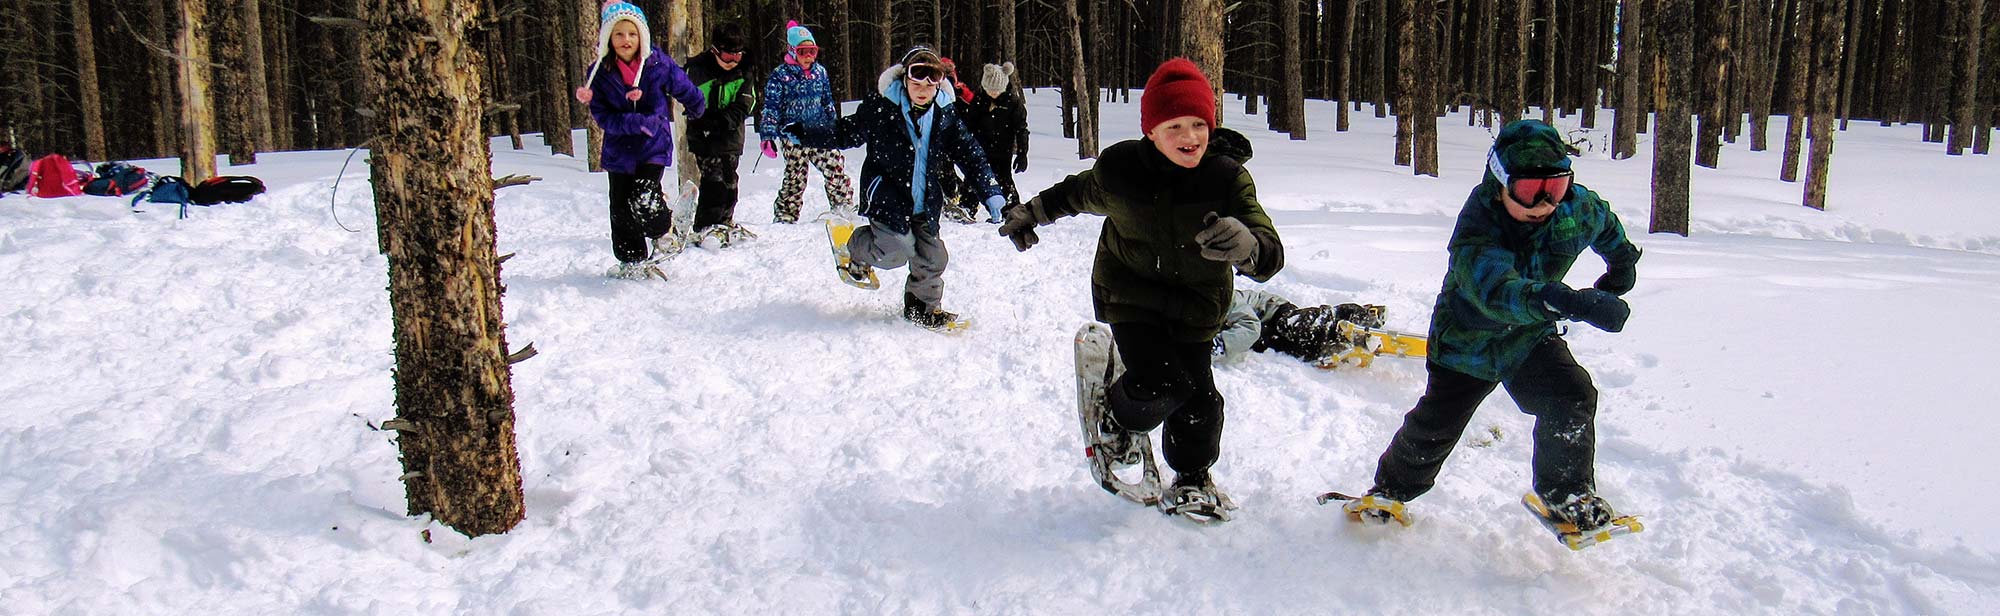 Students run through the forest in snowshoes during a field trip.